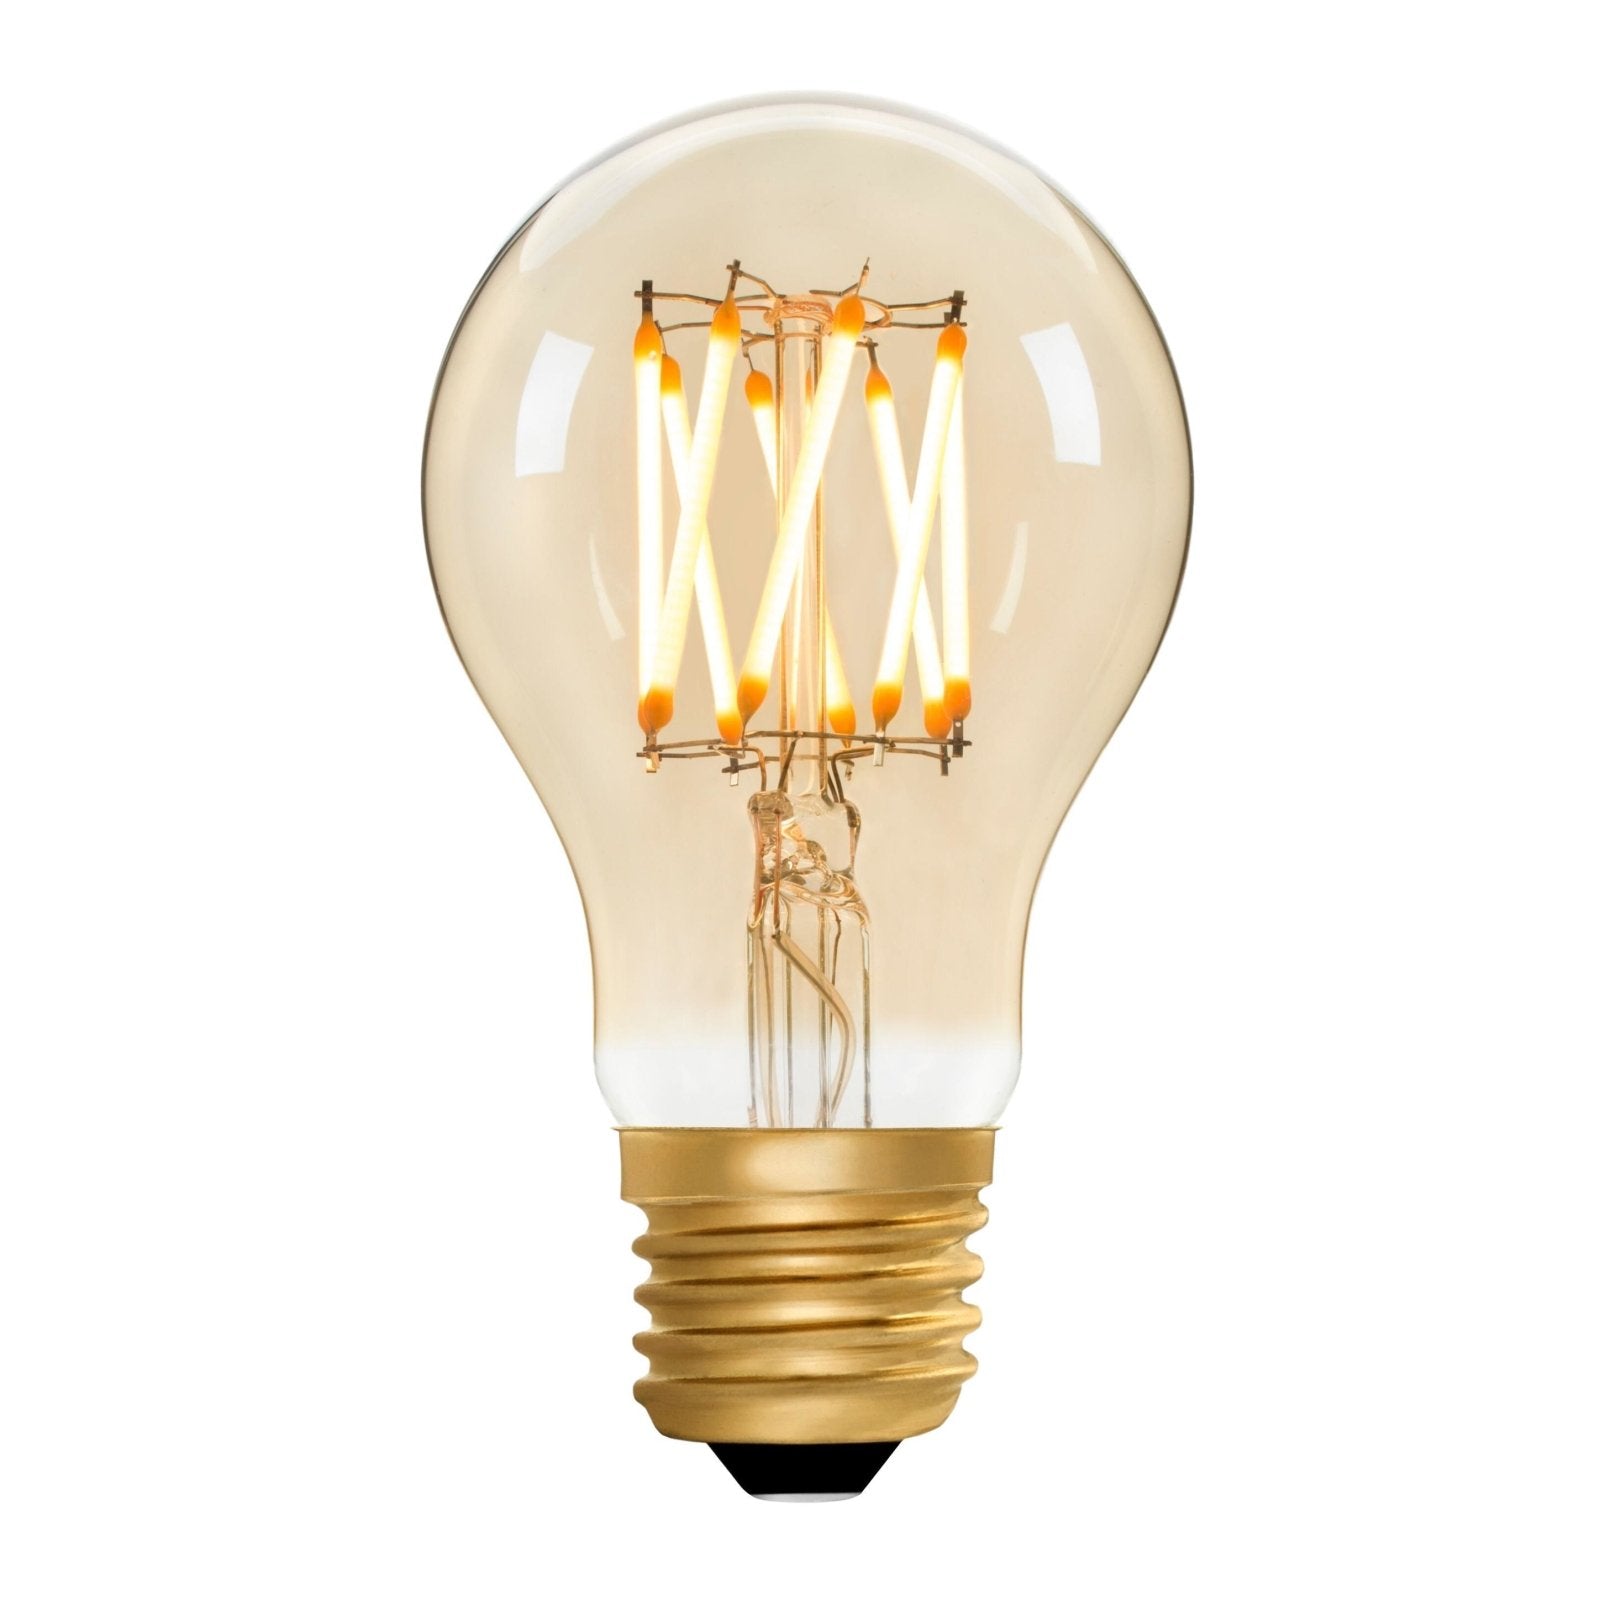 GLS A60 Amber 6W E27 2200K - LED Lamp from RETROLIGHT. Made by Zico Lighting.